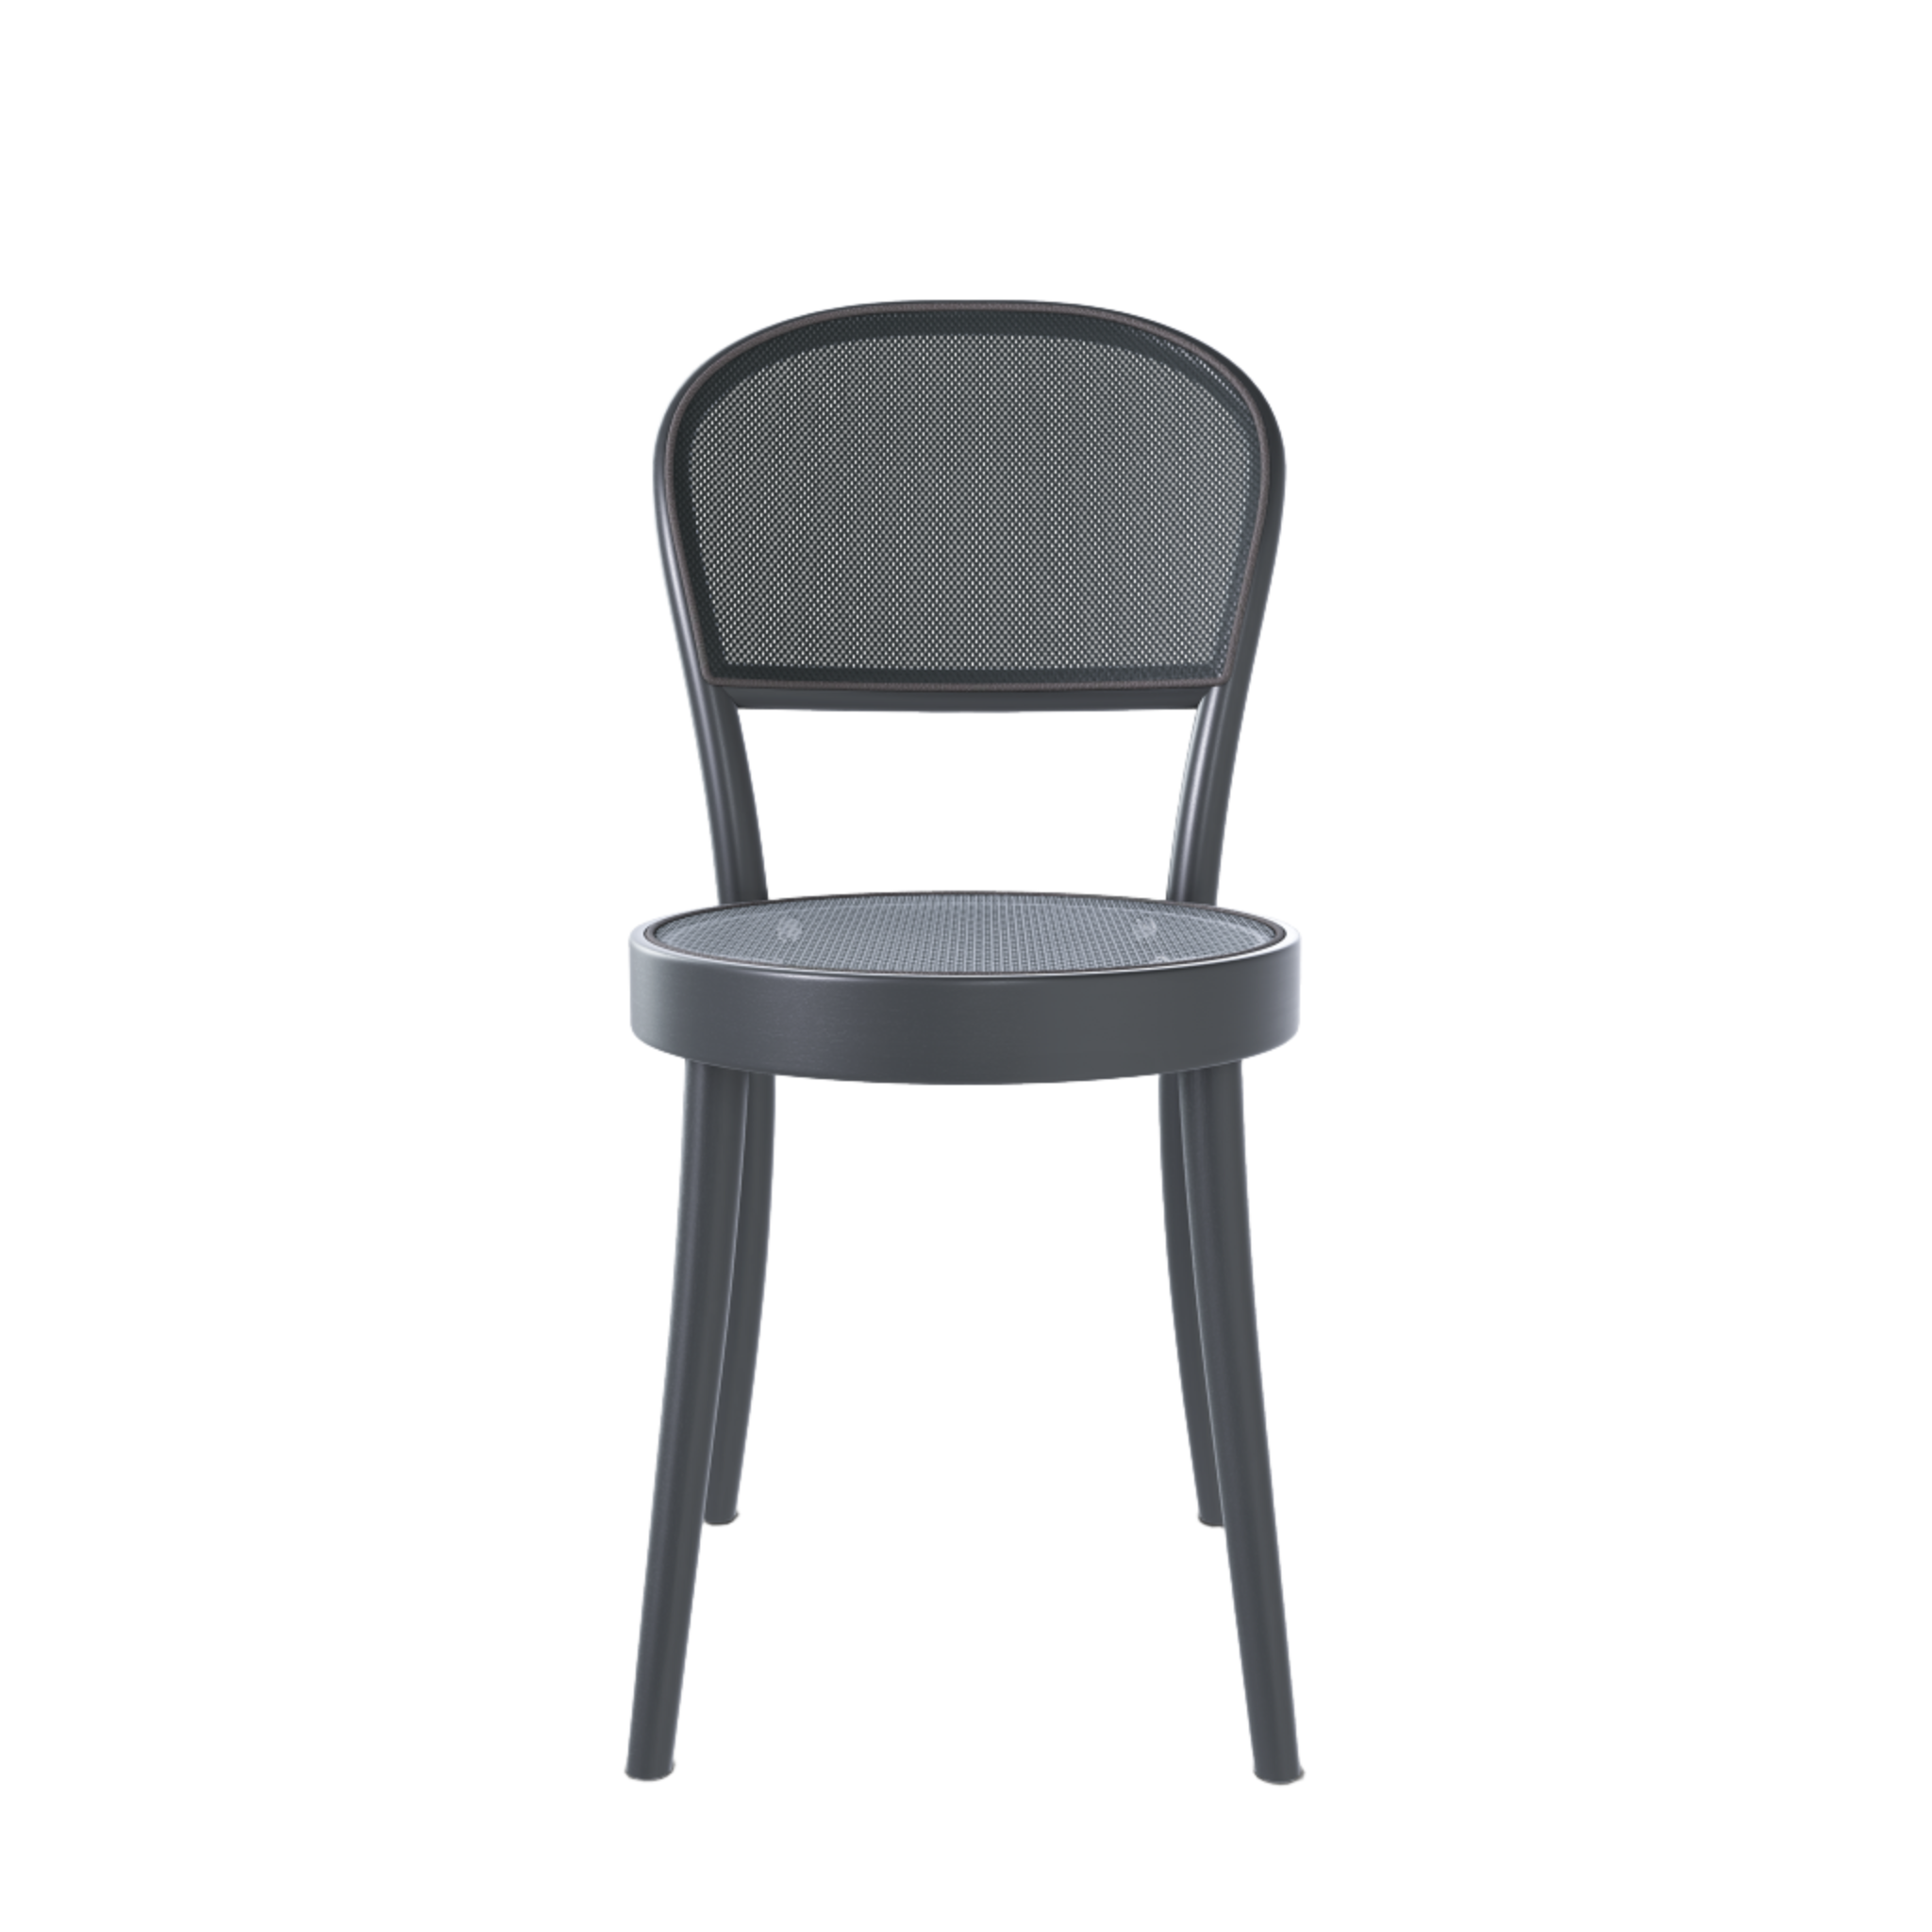 Ton 314 chair with matching seat mesh in grey shadow